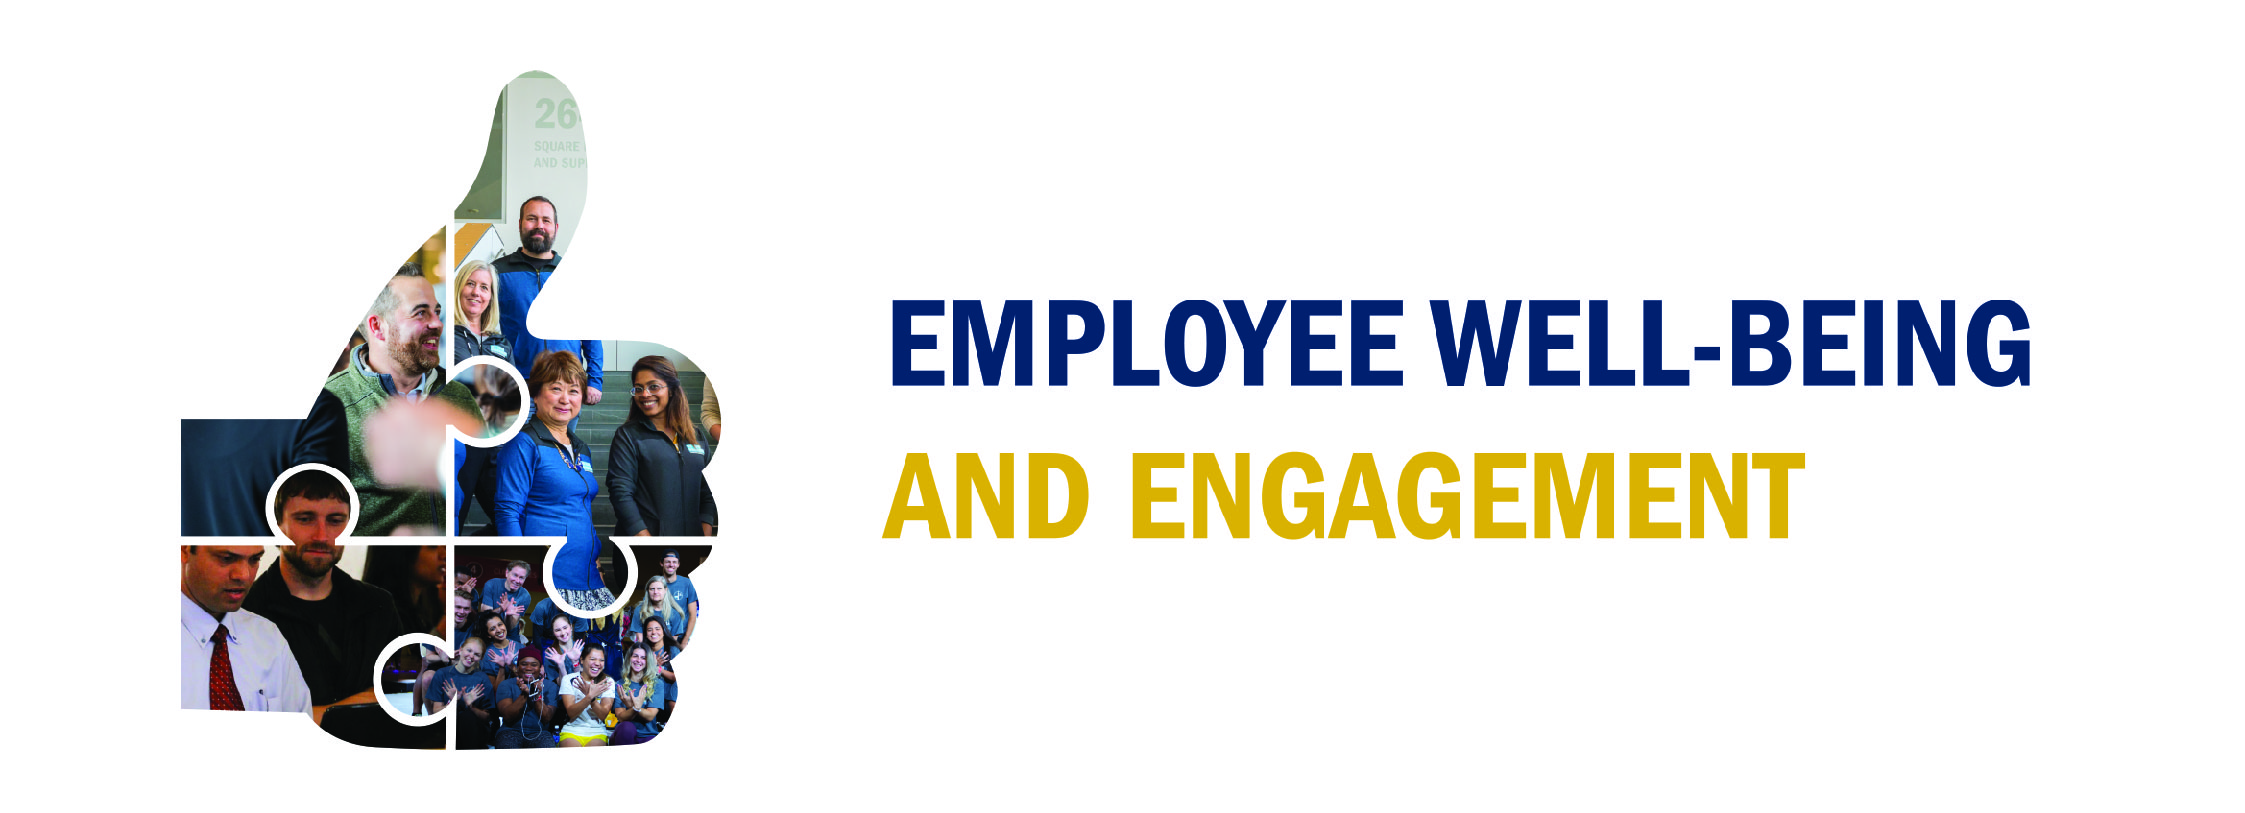 Thumbs up graphic with smiling employees within it. Employee Well-Being and Engagement title. 